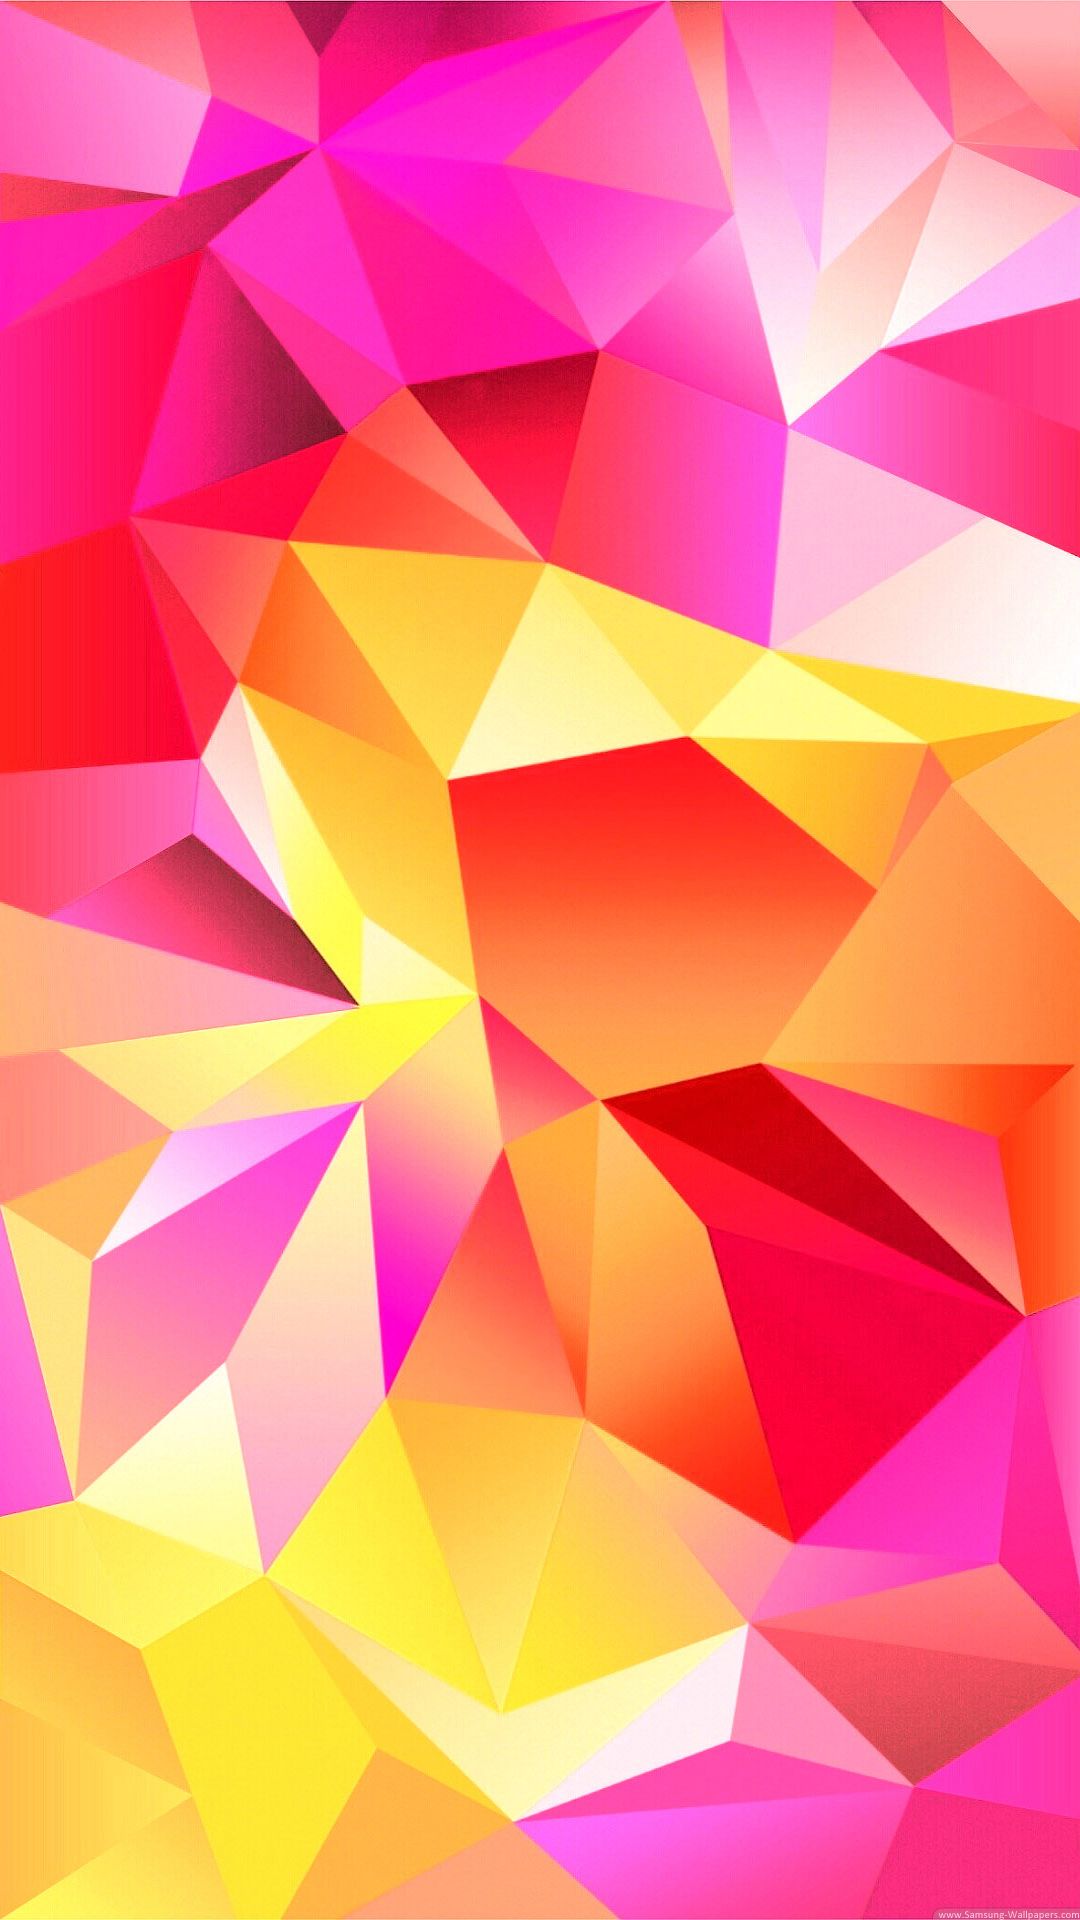 Pink Samsung Galaxy S5 Wallpapers on